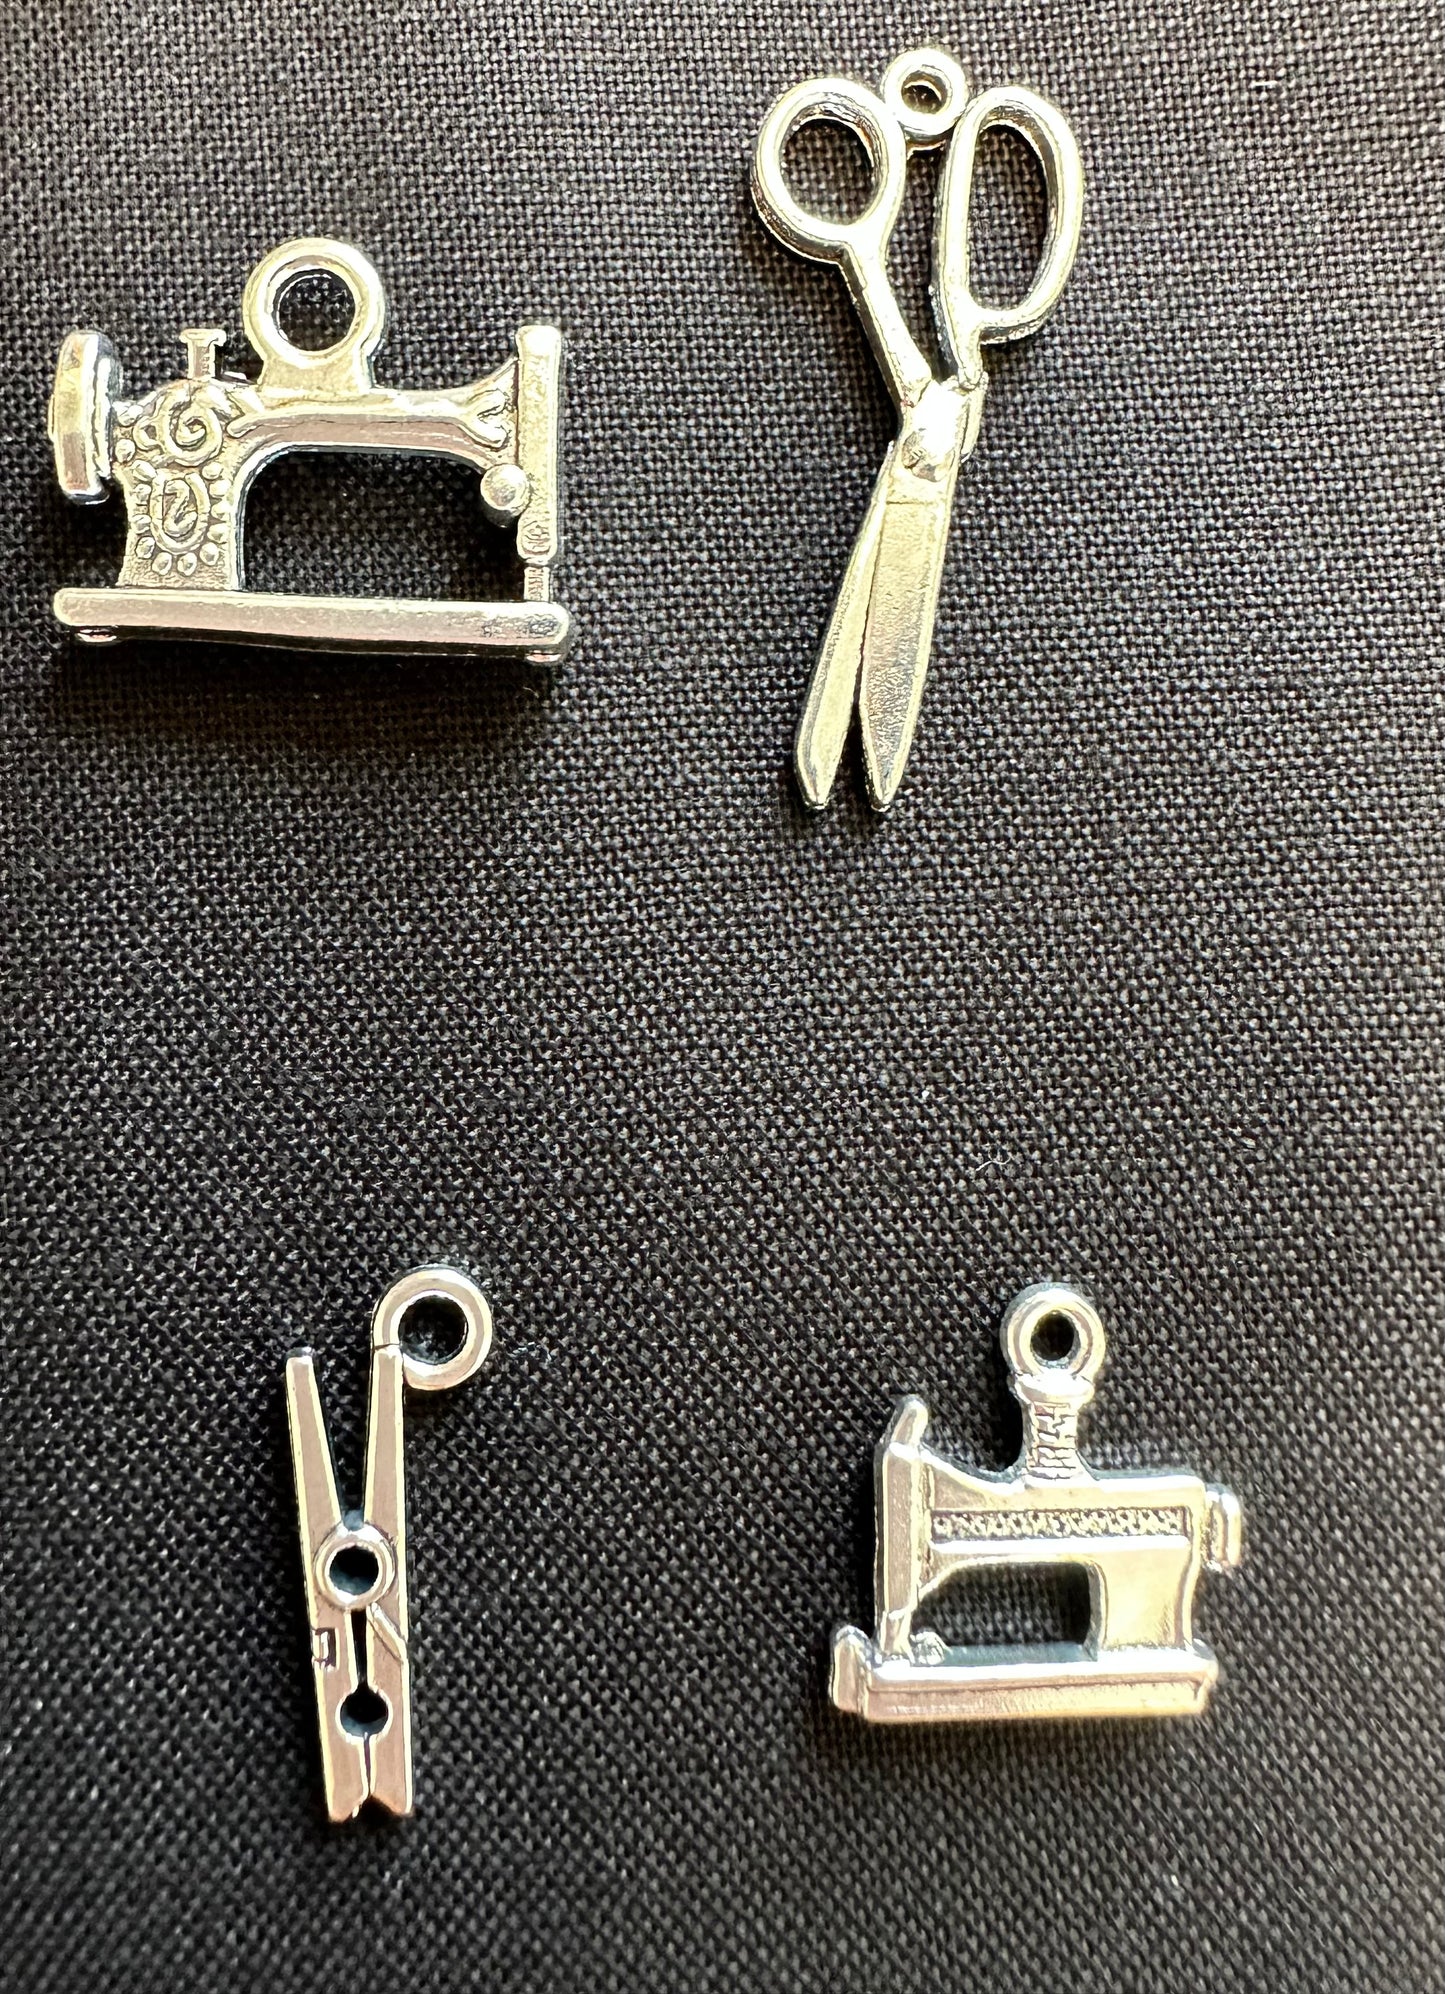 Antique Inspired Sewing Charms for Jewelry Making, Crafting and Journaling